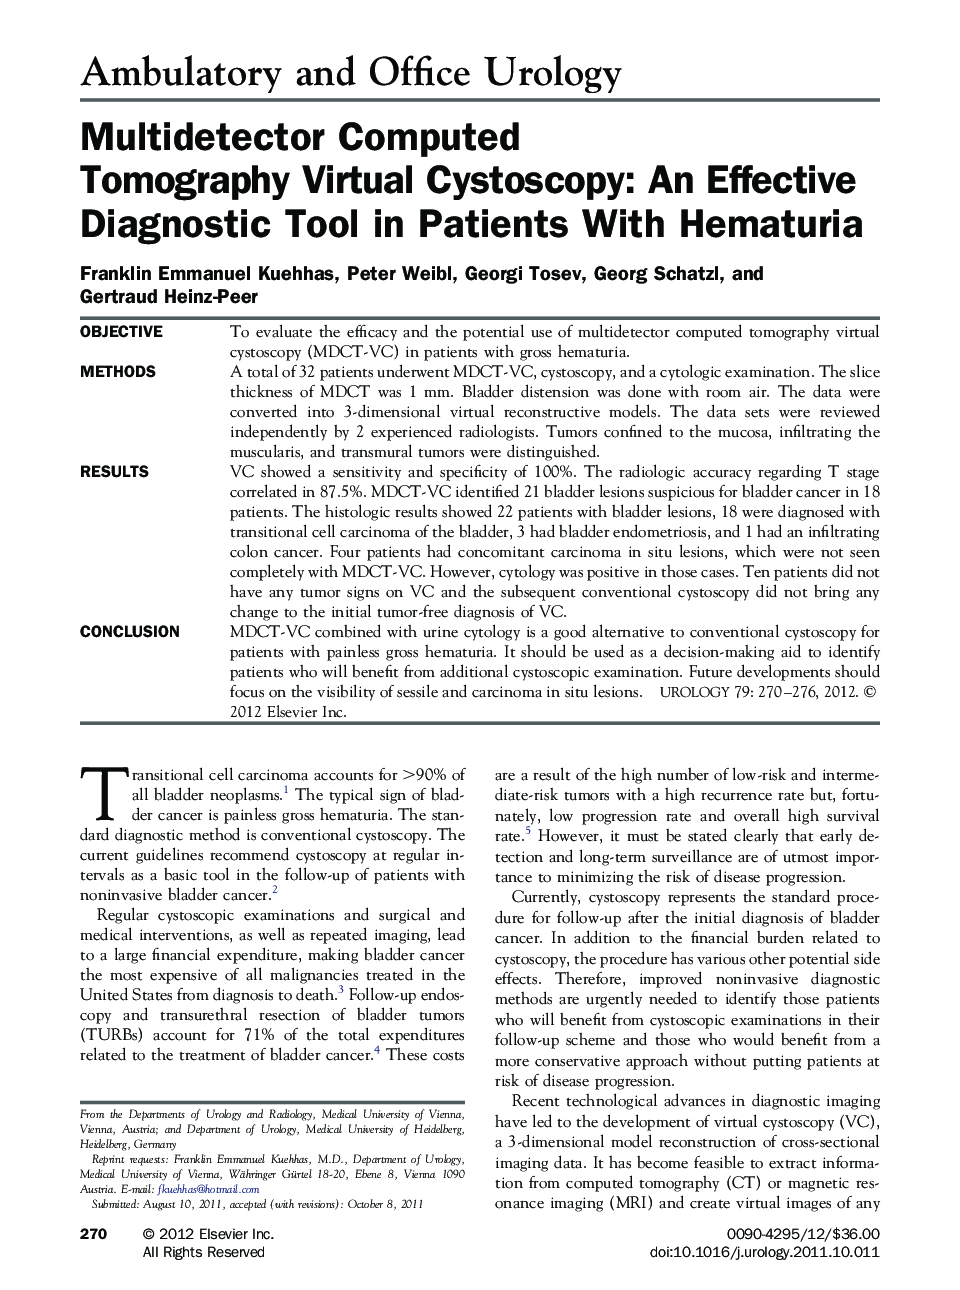 Multidetector Computed Tomography Virtual Cystoscopy: An Effective Diagnostic Tool in Patients With Hematuria